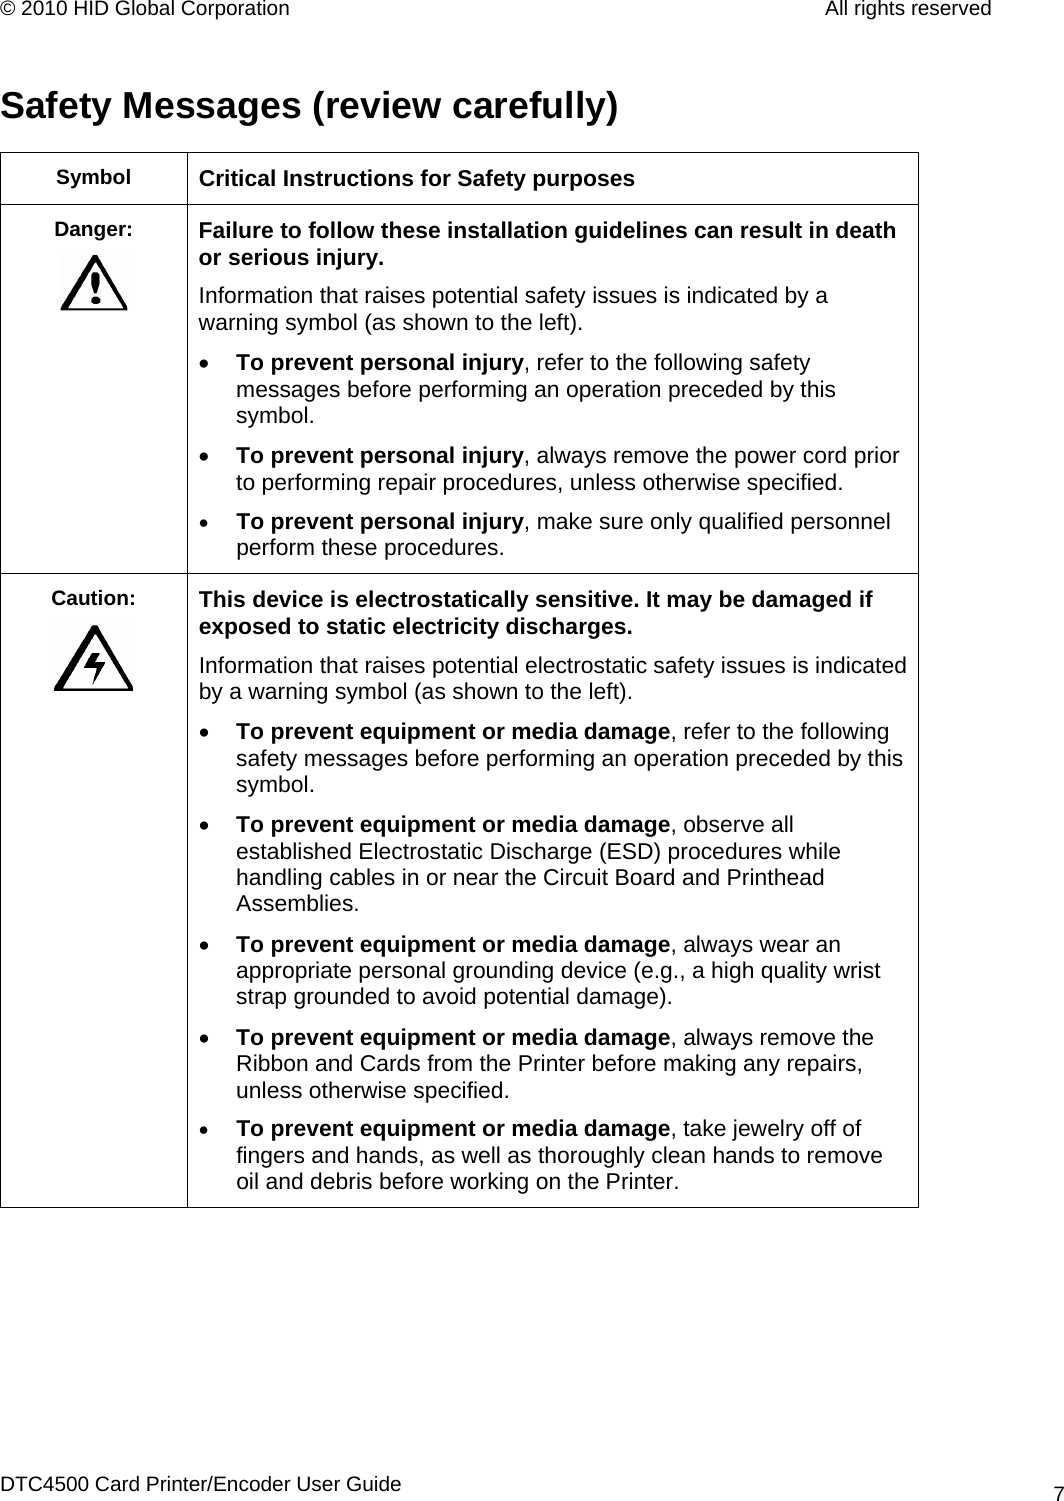 © 2010 HID Global Corporation         All rights reserved  Safety Messages (review carefully) Symbol  Critical Instructions for Safety purposes Danger:  Failure to follow these installation guidelines can result in death or serious injury.  Information that raises potential safety issues is indicated by a warning symbol (as shown to the left). • To prevent personal injury, refer to the following safety messages before performing an operation preceded by this symbol.  • To prevent personal injury, always remove the power cord prior to performing repair procedures, unless otherwise specified.  • To prevent personal injury, make sure only qualified personnel perform these procedures. Caution:    This device is electrostatically sensitive. It may be damaged if exposed to static electricity discharges.  Information that raises potential electrostatic safety issues is indicated by a warning symbol (as shown to the left). • To prevent equipment or media damage, refer to the following safety messages before performing an operation preceded by this symbol. • To prevent equipment or media damage, observe all established Electrostatic Discharge (ESD) procedures while handling cables in or near the Circuit Board and Printhead Assemblies.  • To prevent equipment or media damage, always wear an appropriate personal grounding device (e.g., a high quality wrist strap grounded to avoid potential damage). • To prevent equipment or media damage, always remove the Ribbon and Cards from the Printer before making any repairs, unless otherwise specified.  • To prevent equipment or media damage, take jewelry off of fingers and hands, as well as thoroughly clean hands to remove oil and debris before working on the Printer.  DTC4500 Card Printer/Encoder User Guide 7